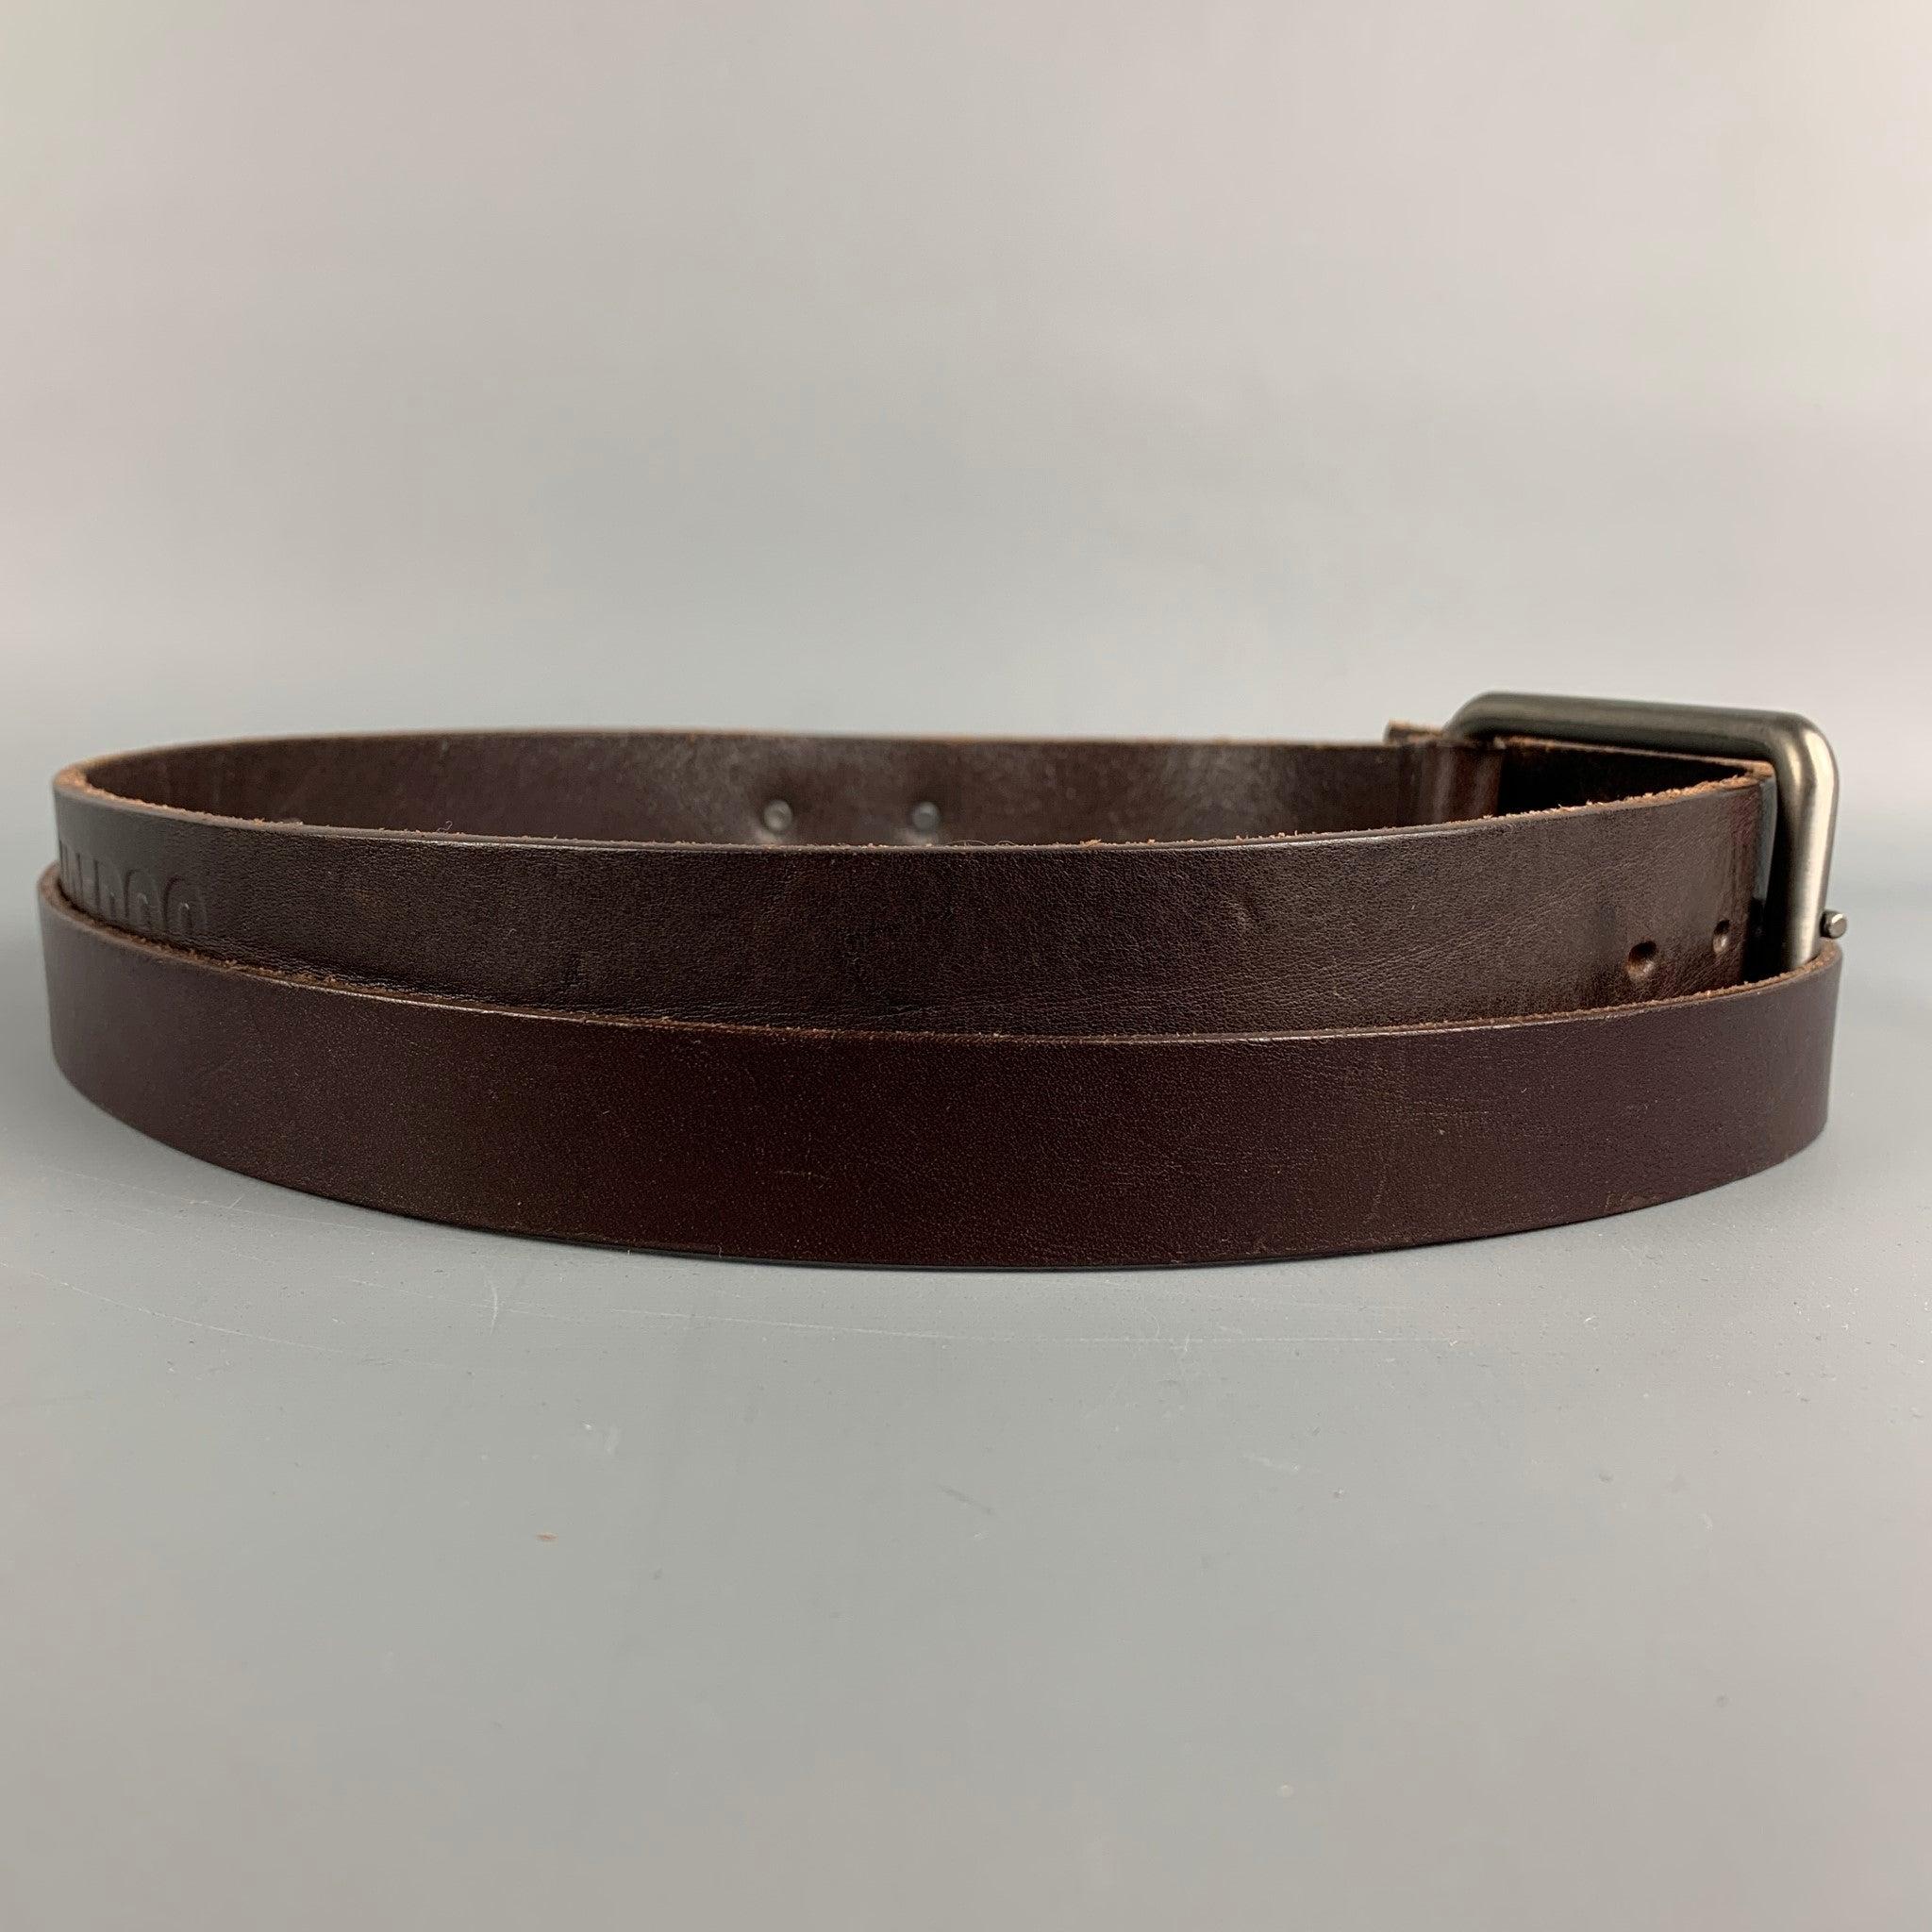 DIRK BIKKEMBERGS belt comes in a brown leather featuring a double buckle design. Made in Italy.
Very Good
Pre-Owned Condition. 

Marked:   44/07Length: 47.5 inches  Width: 1.5 inches  Fits: 37 inches  - 42 inches  Buckle: 3 inches 
  
  
